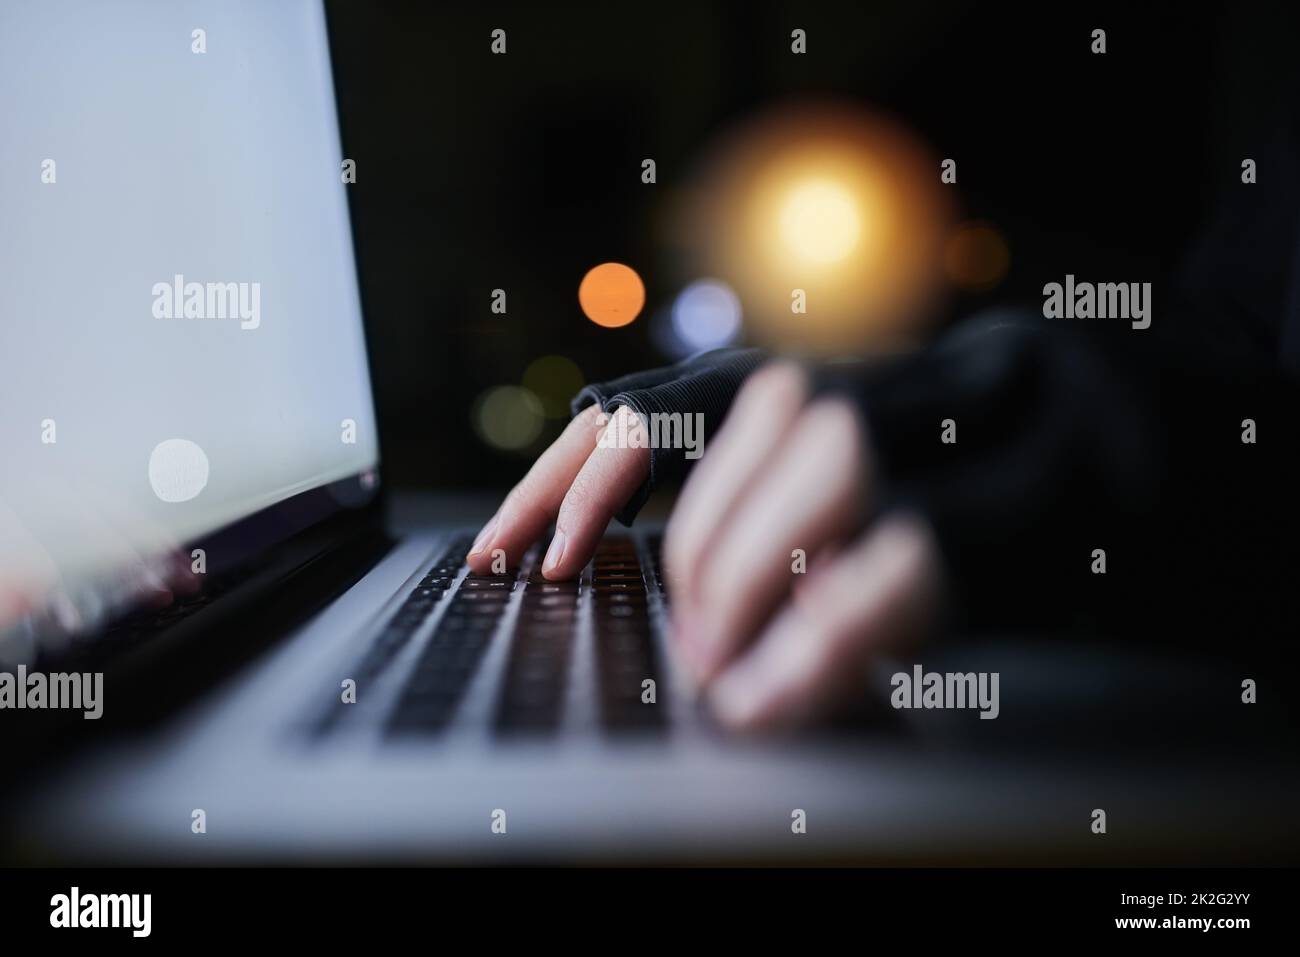 Be careful what you share online. Shot of an unrecognizable computer hacker using a laptop late at night. Stock Photo